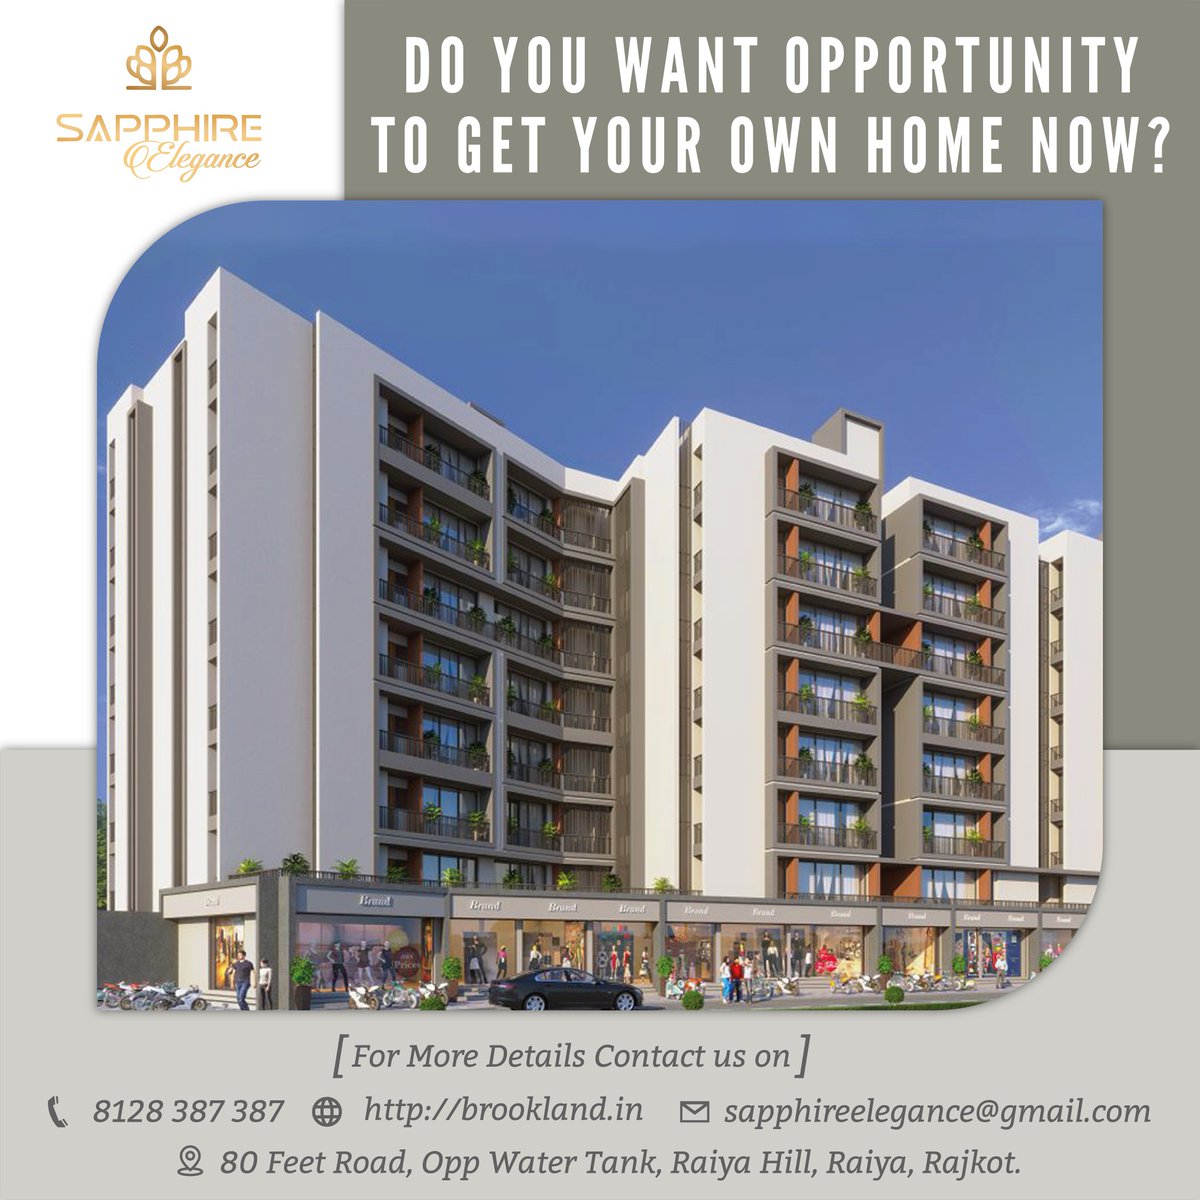 Grab this Opportunity get your own Home now with 2Bhk & 3Bhk Luxurious Residential Project in a prime location of Rajkot 
Call Us Now -8128387387   

 #BrooklandInfrastrucrure #RealEstate  #Residential    #NewResidentialProjectRajkot #ComingSoon   #SapphireElegance #Rajkot